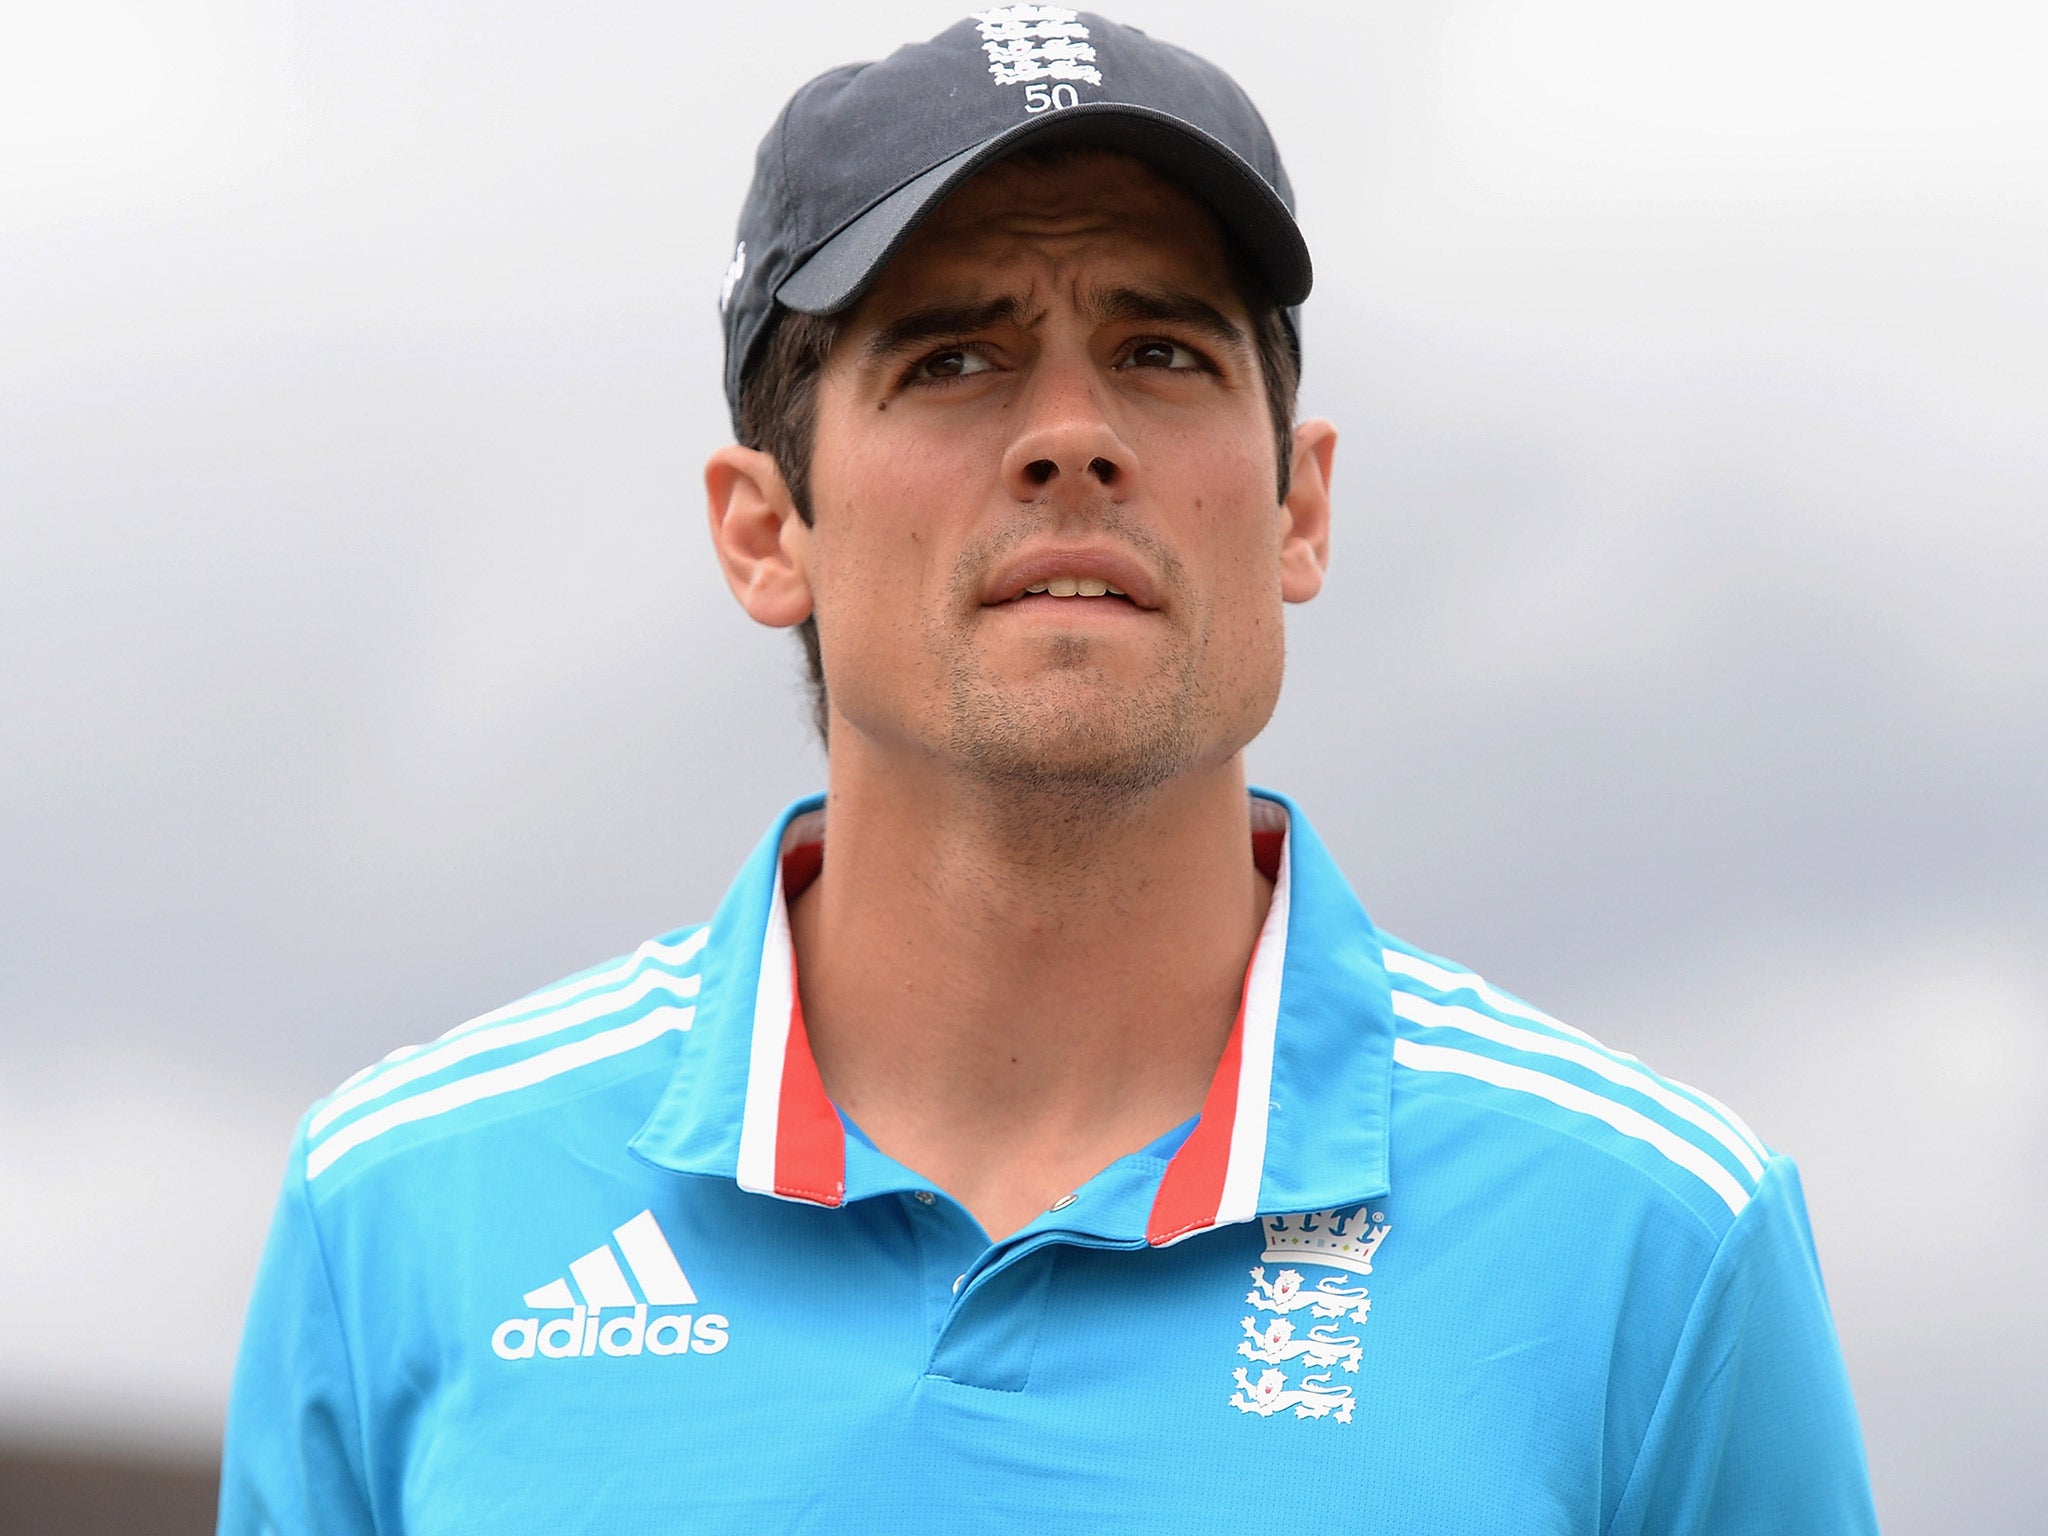 Alastair Cook's ODI record is widely underappreciated